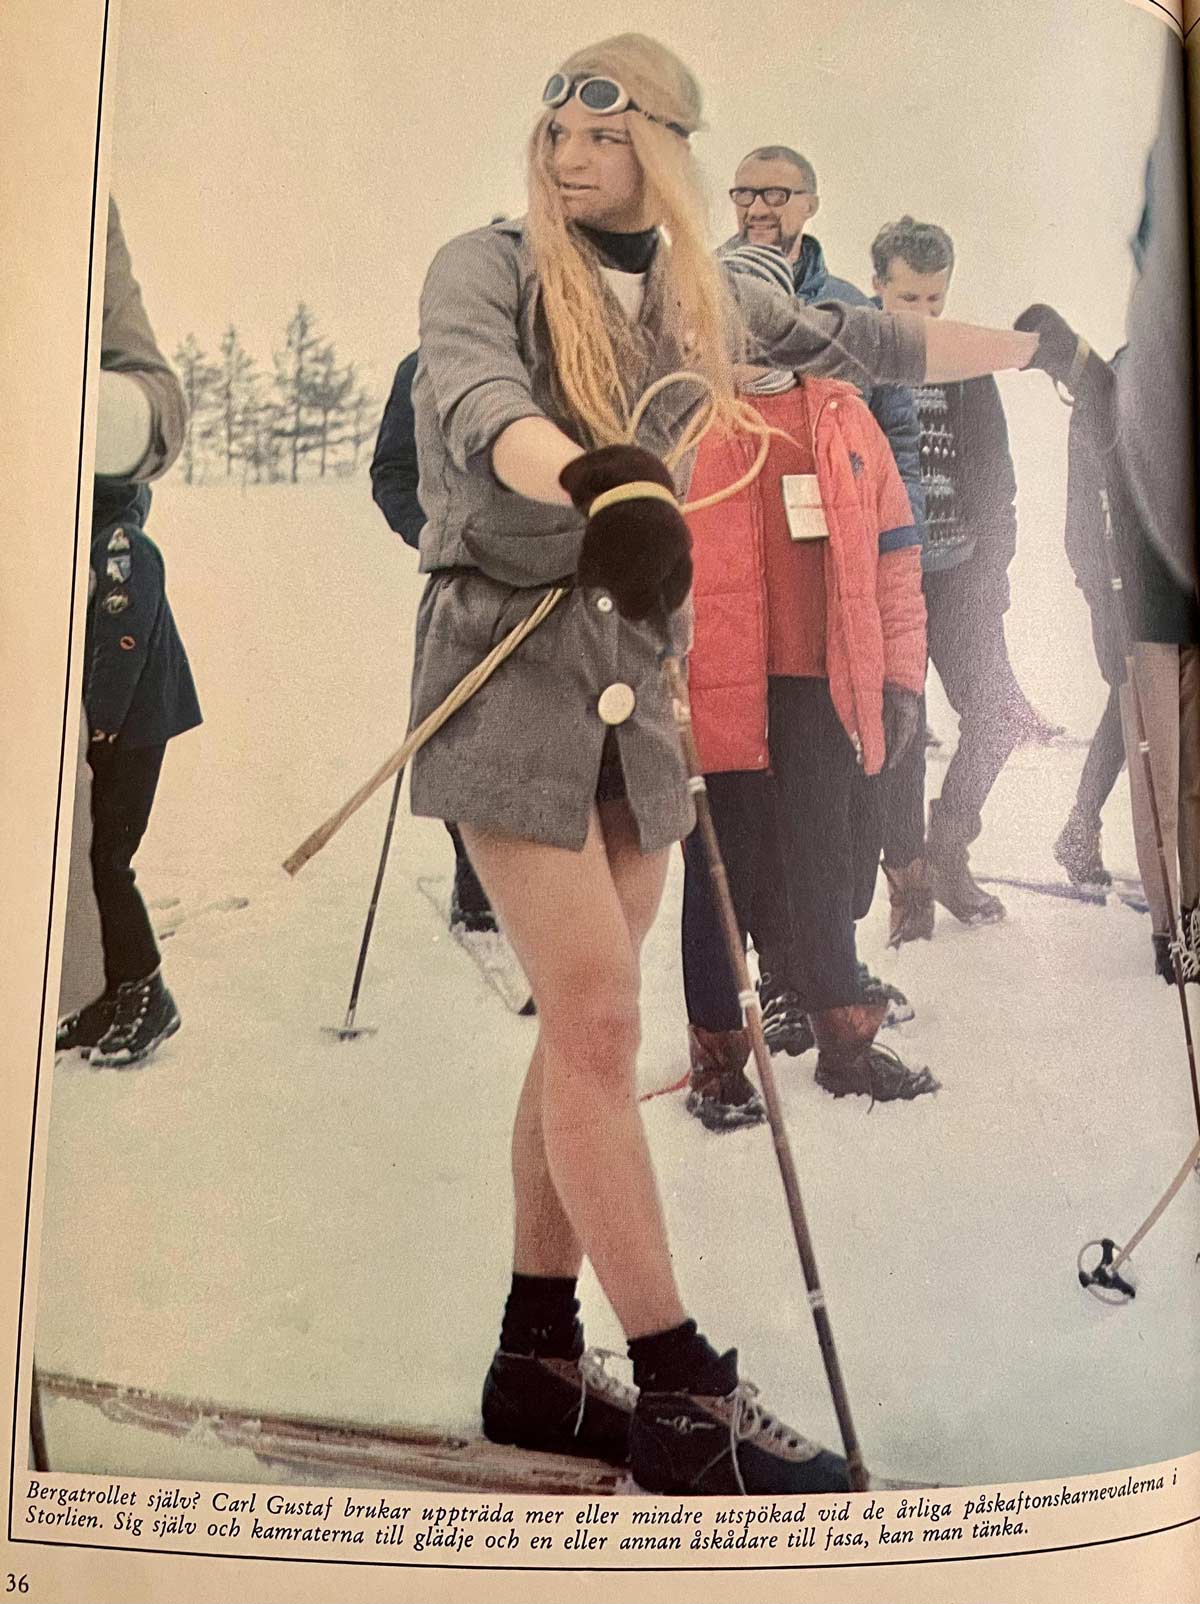 That one time when the Swedish king dressed up as a woman on skis at an Easter festival